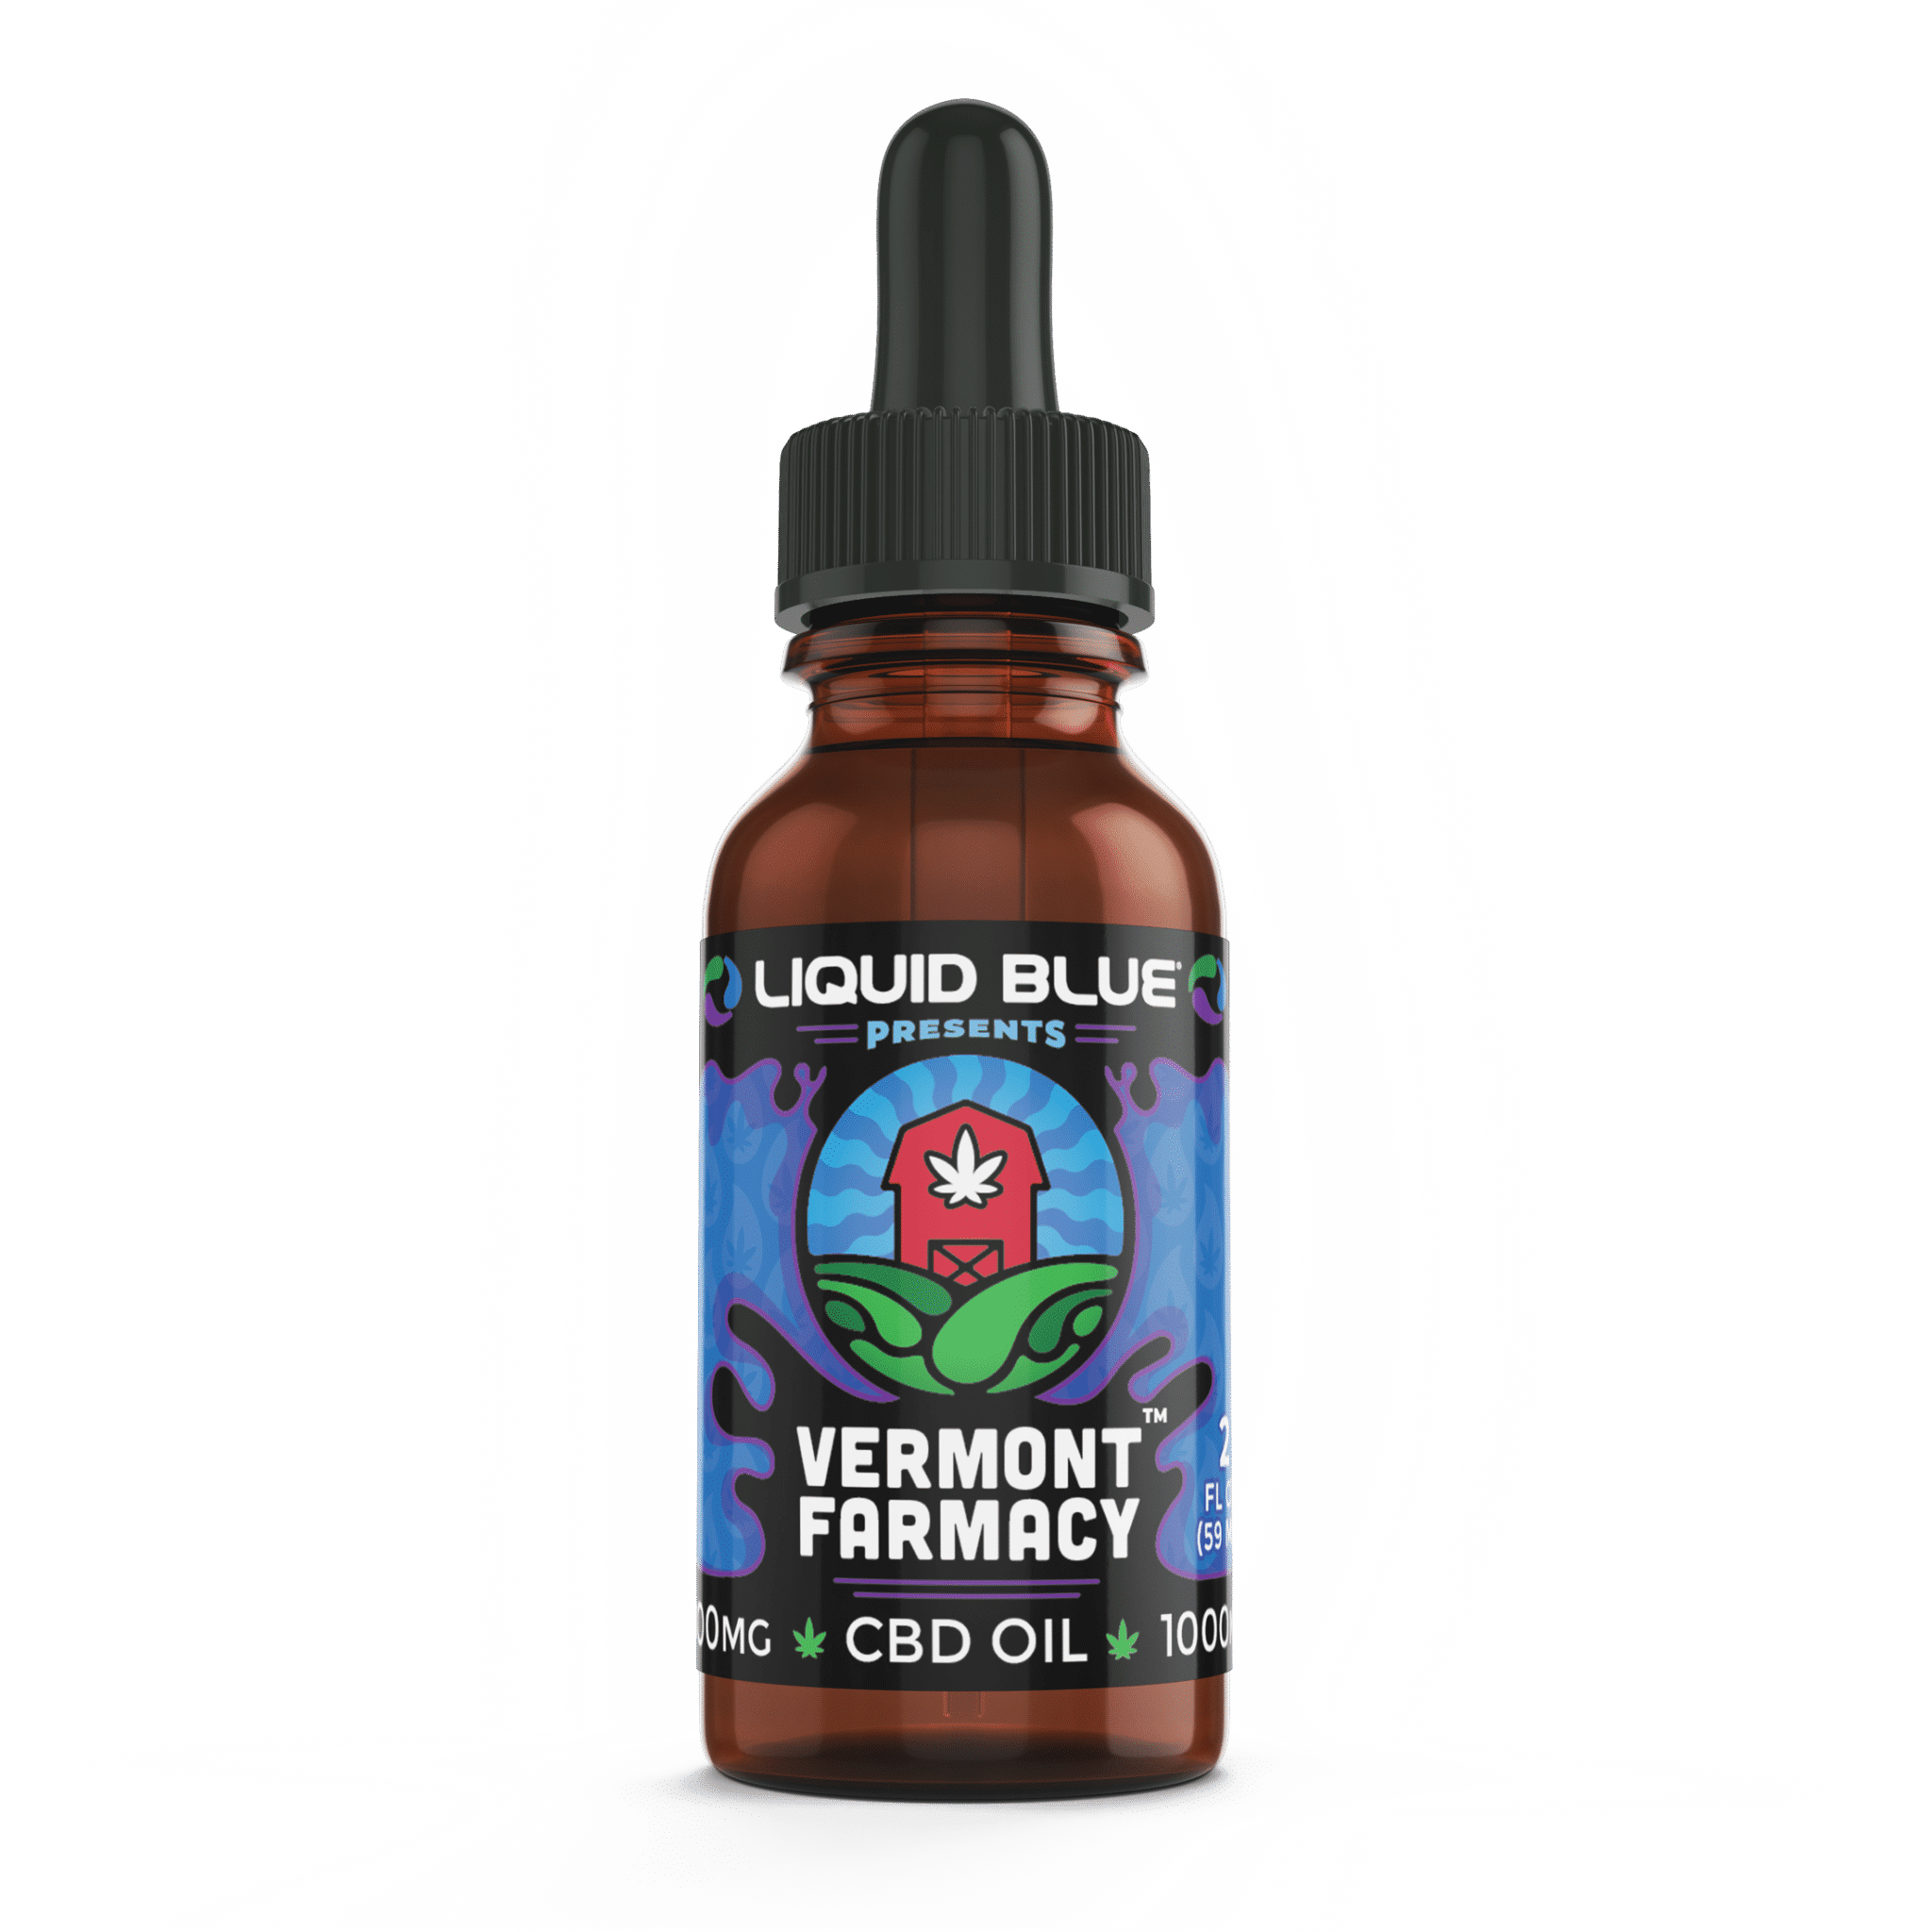 A collaborative hemp product with 1000 milligrams of CBD. 2 ounce amber glass bottle with dropper and psychedelic labelProduced by Vermont Farmacy for Liquid Blue T shirts. Made with Organic hemp oil, farm grown CBD and terpenes